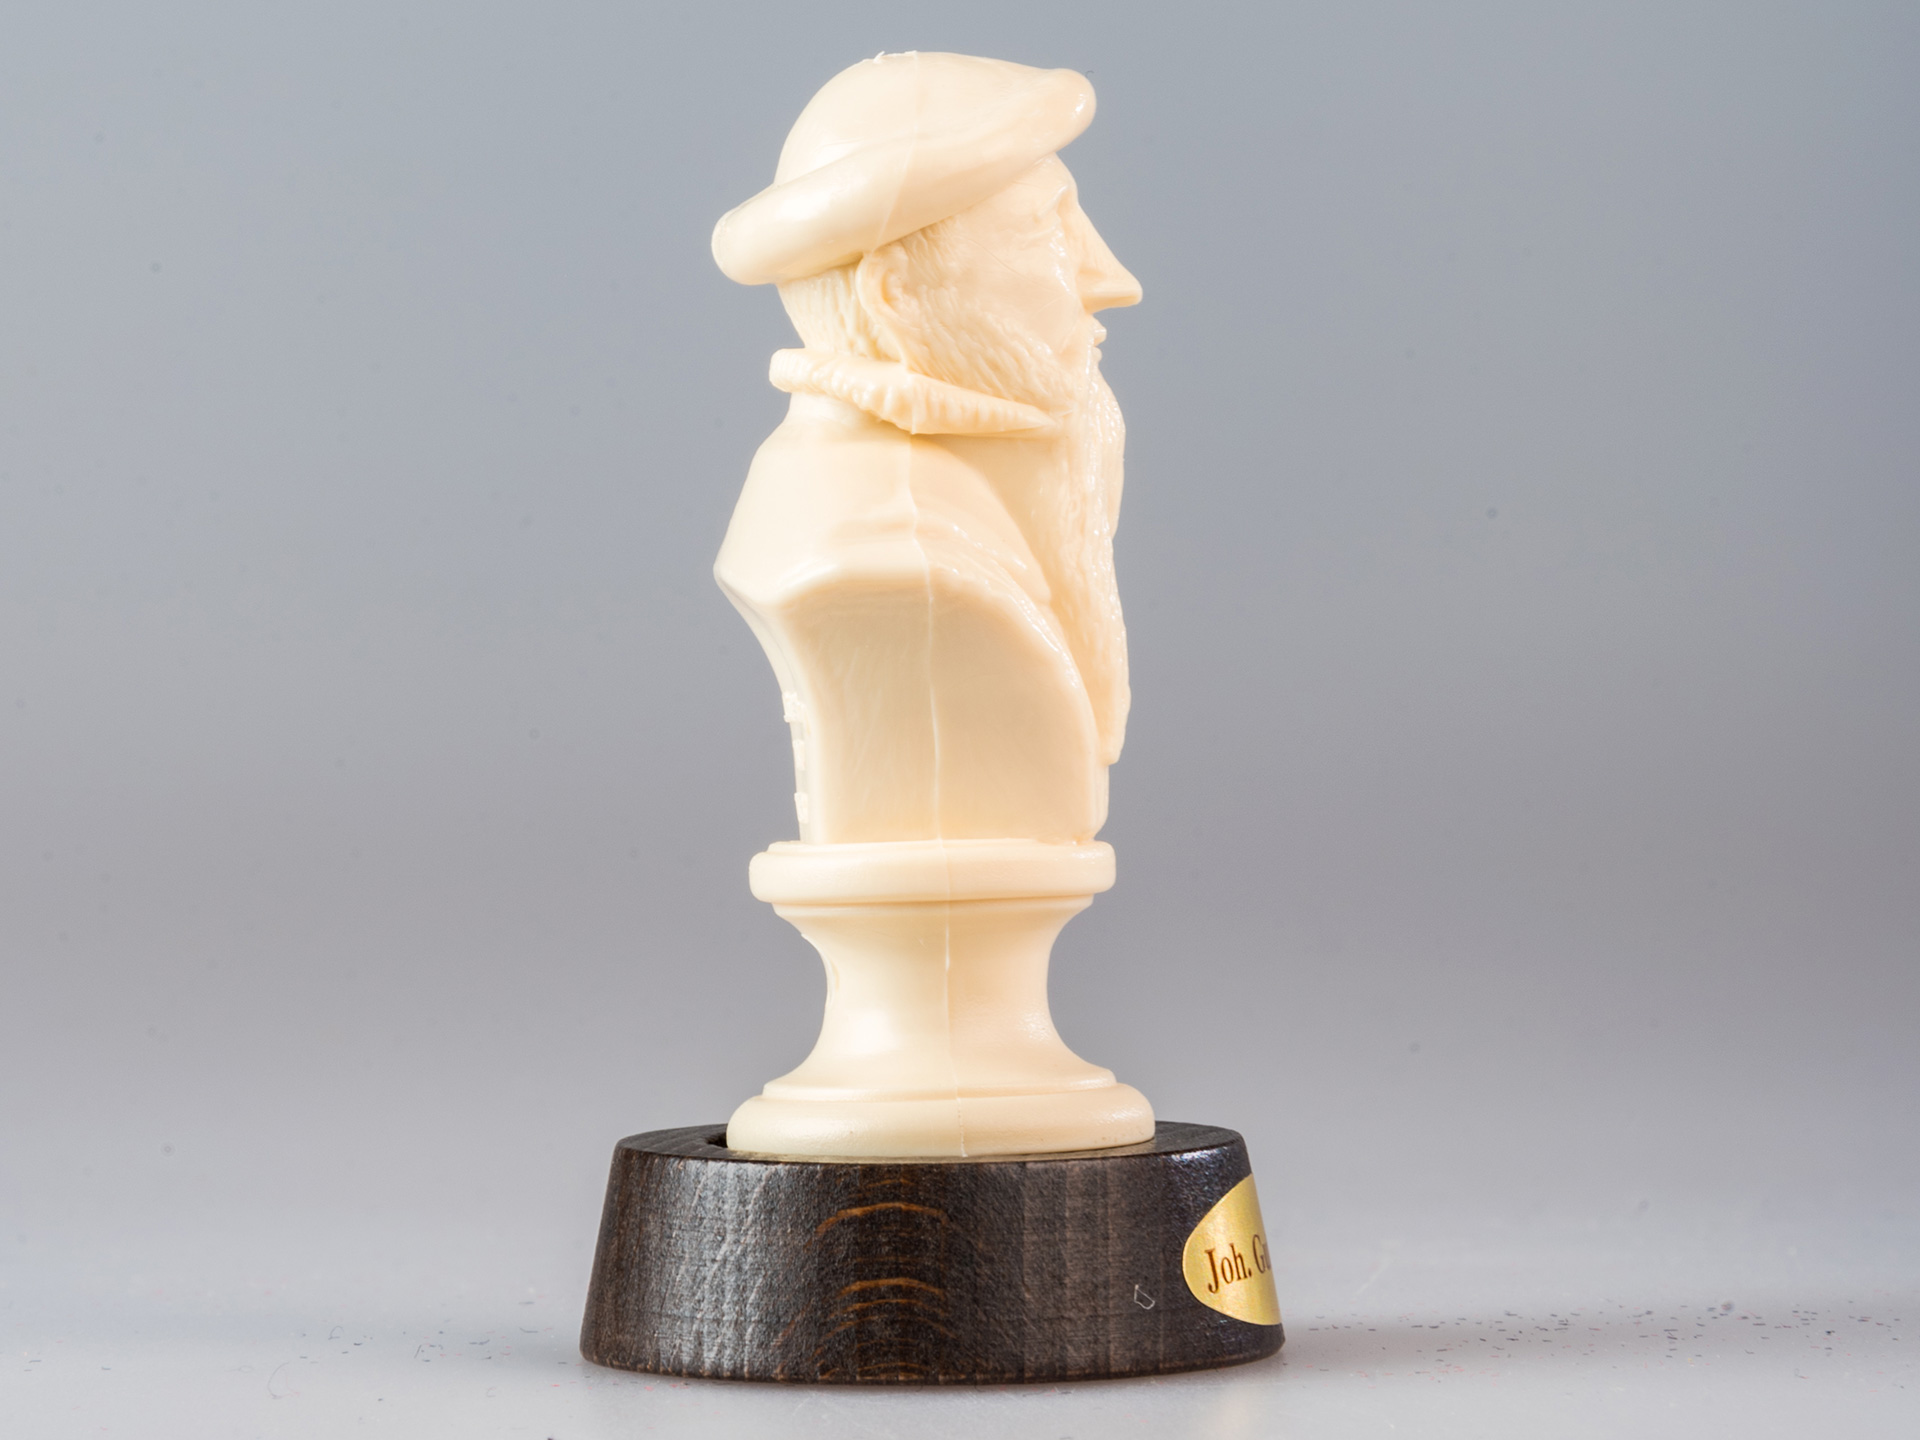 Small bust of Gutenberg with base